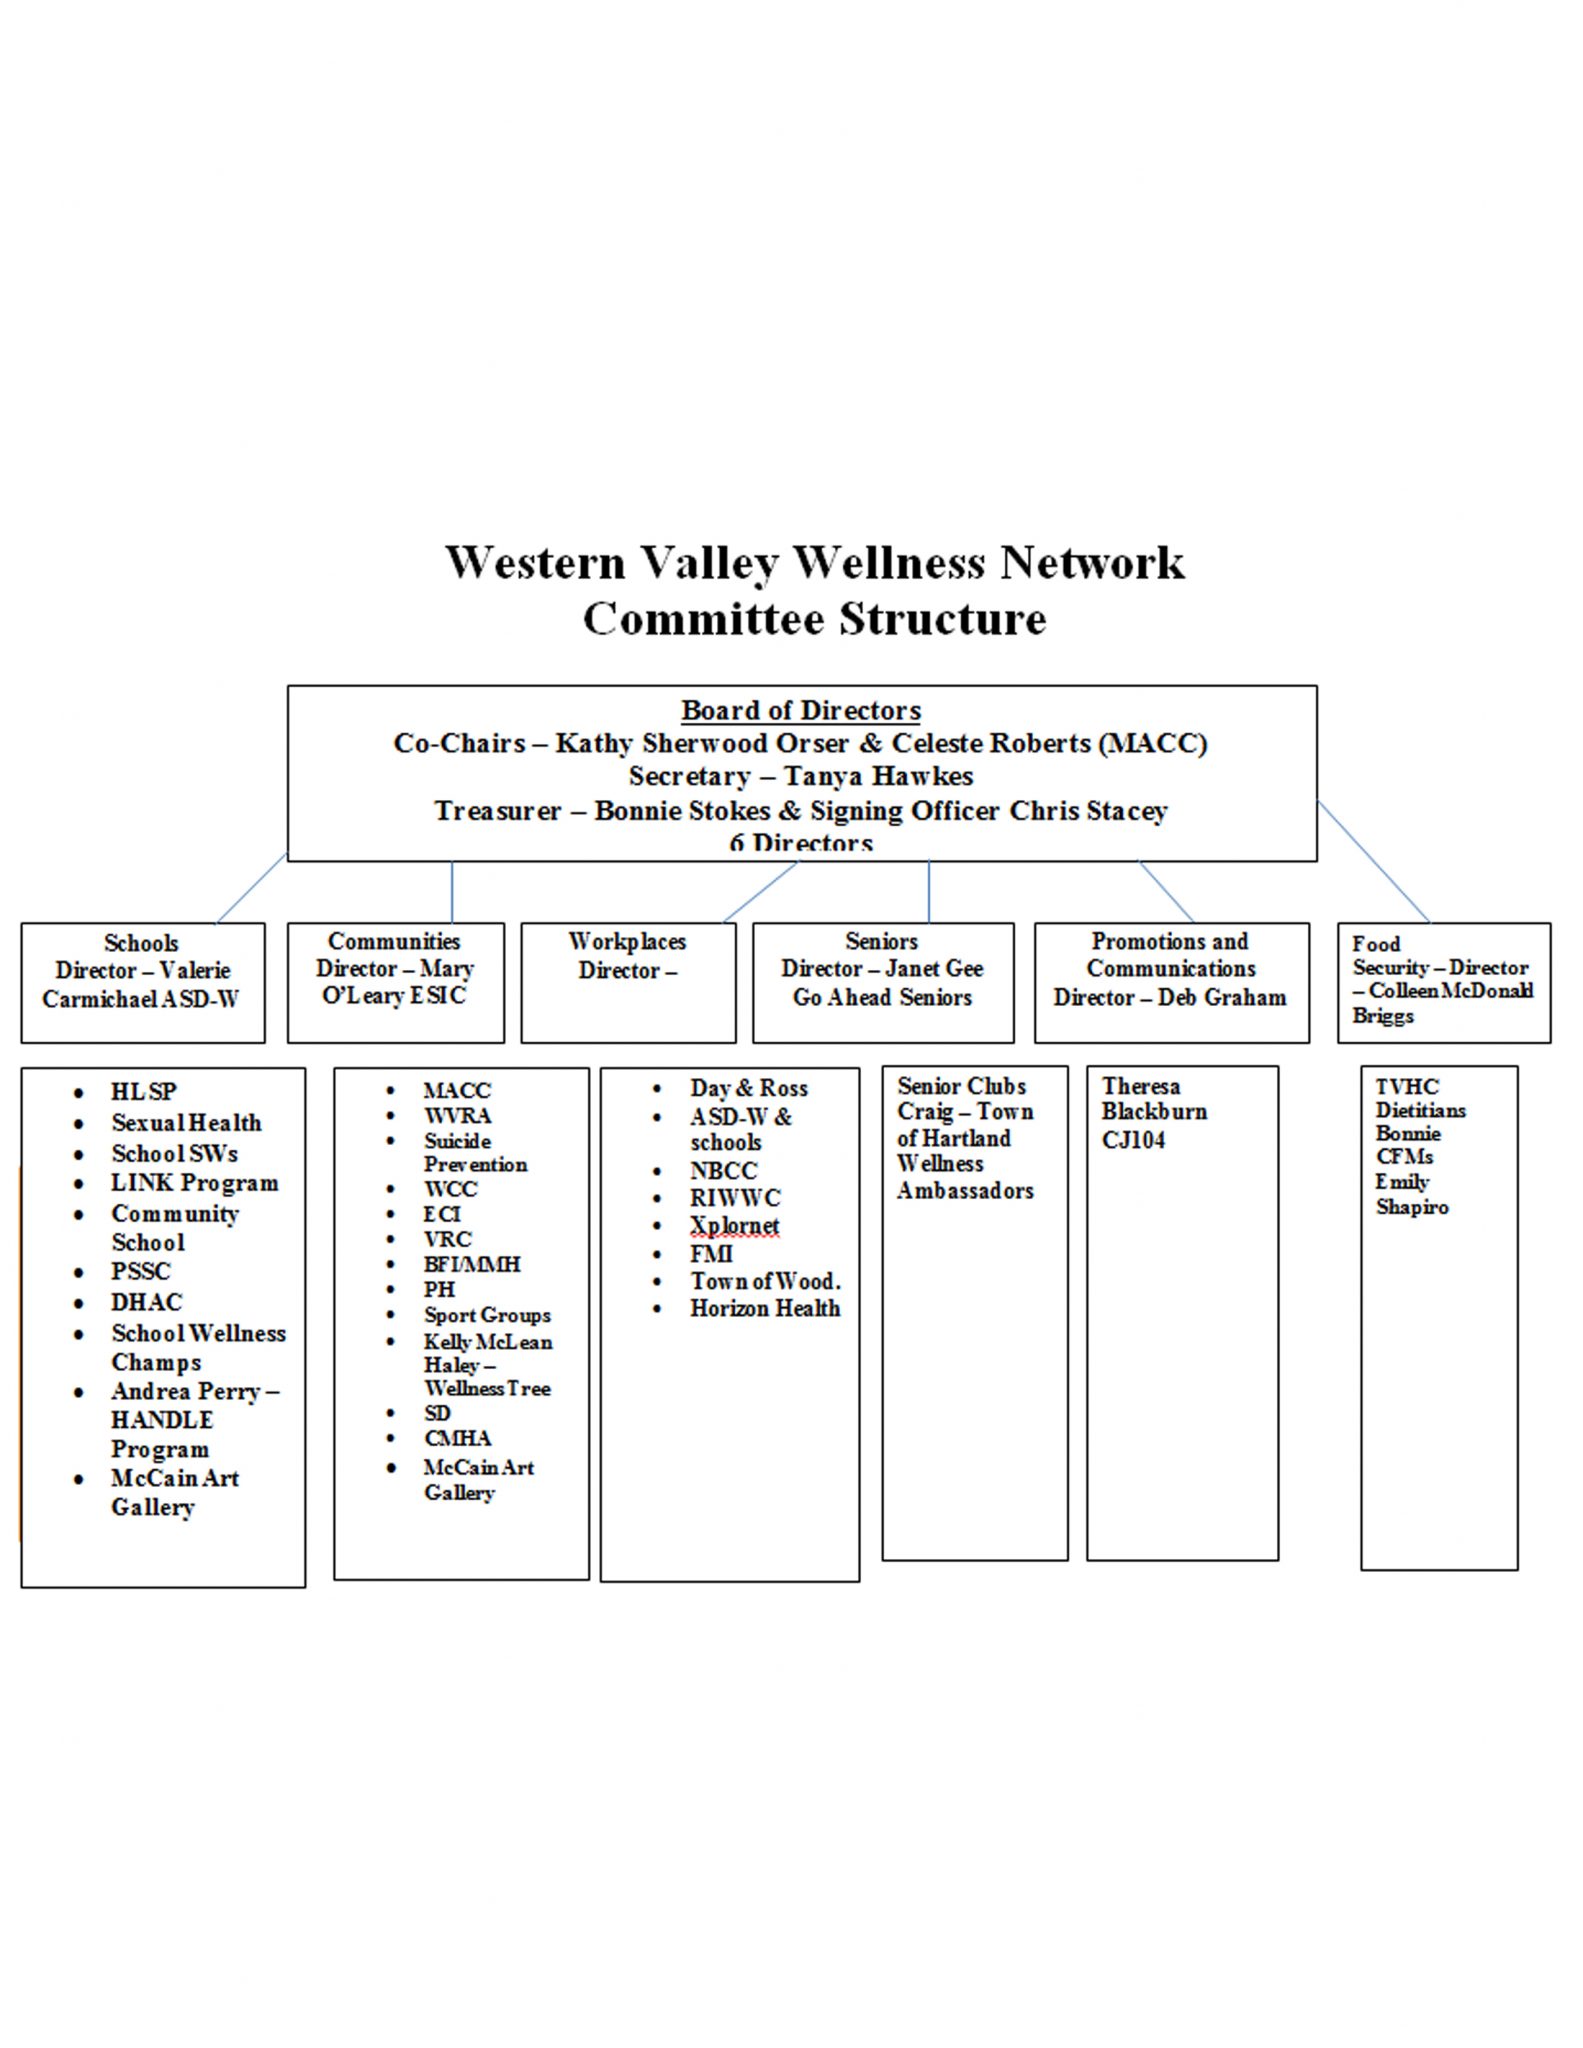 Western Valley Action Plan